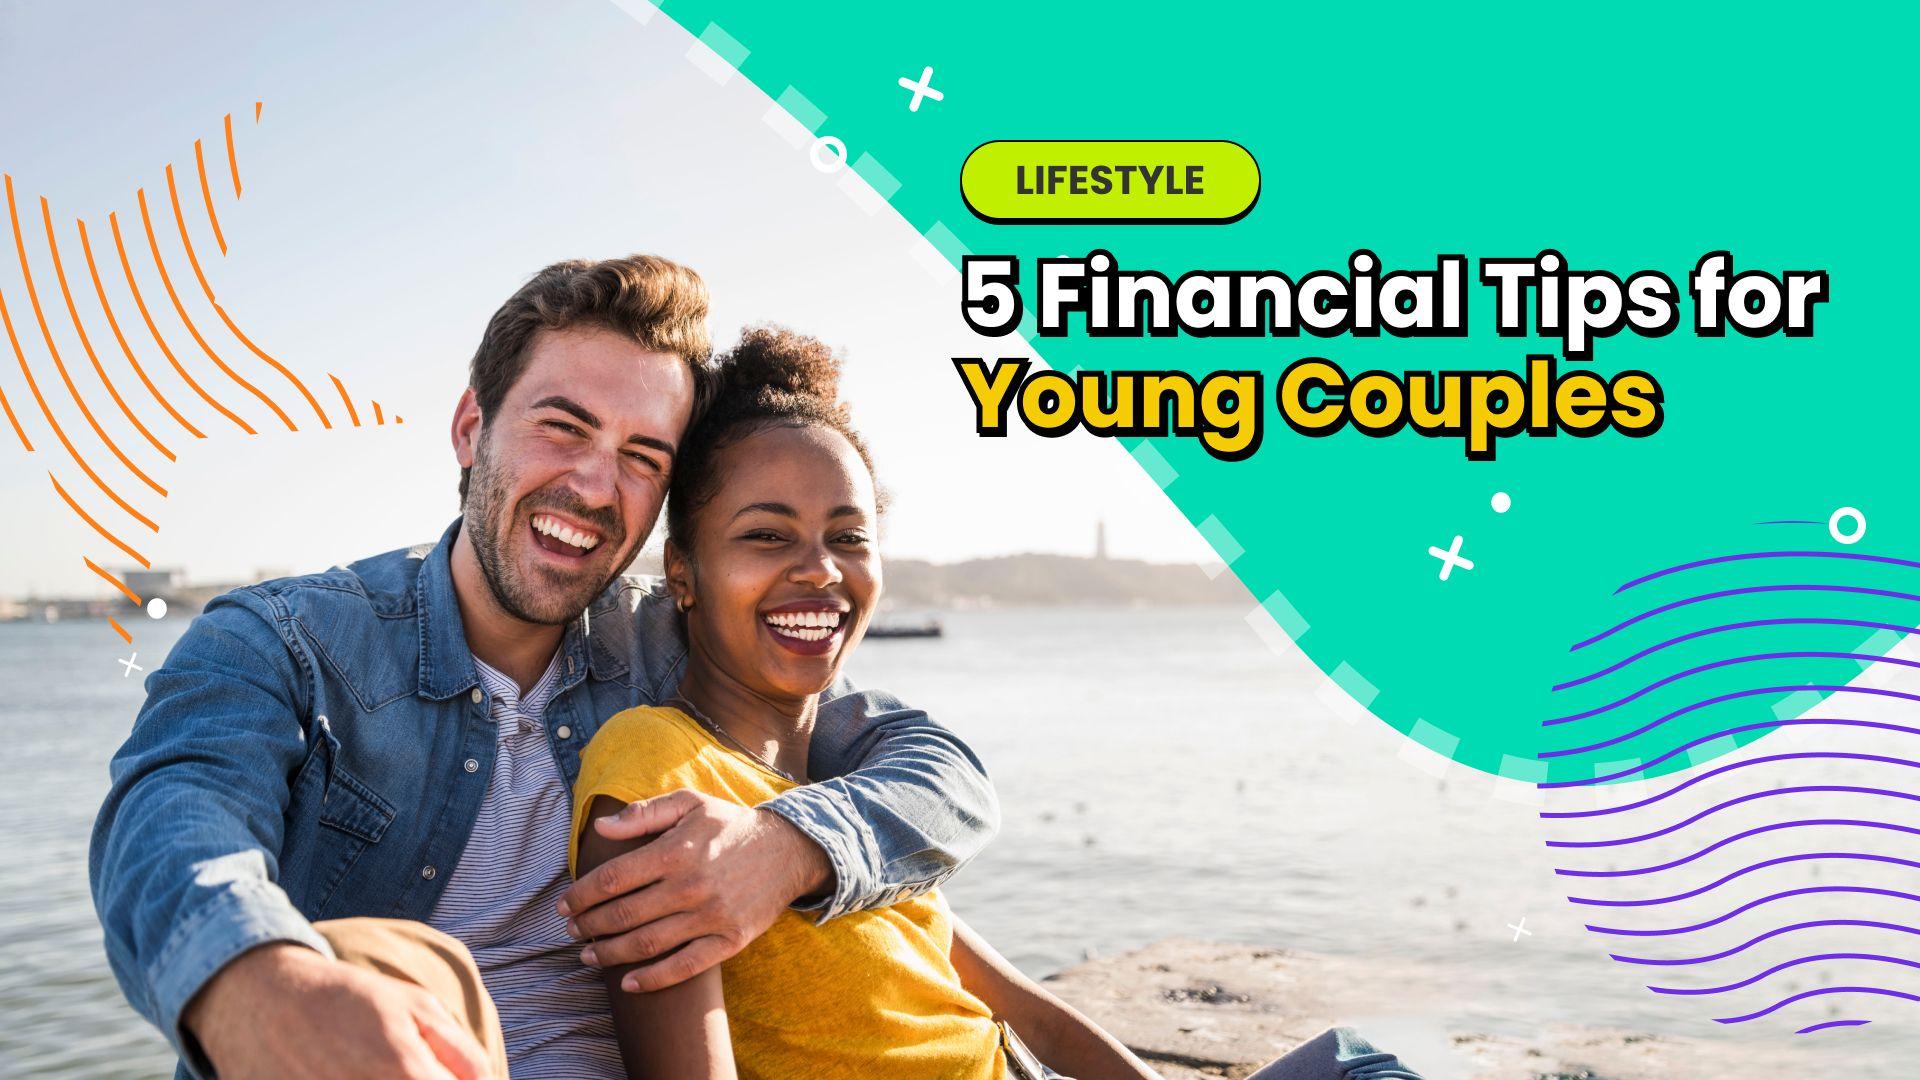 5 Financial Tips for Young Couples (1).jpg